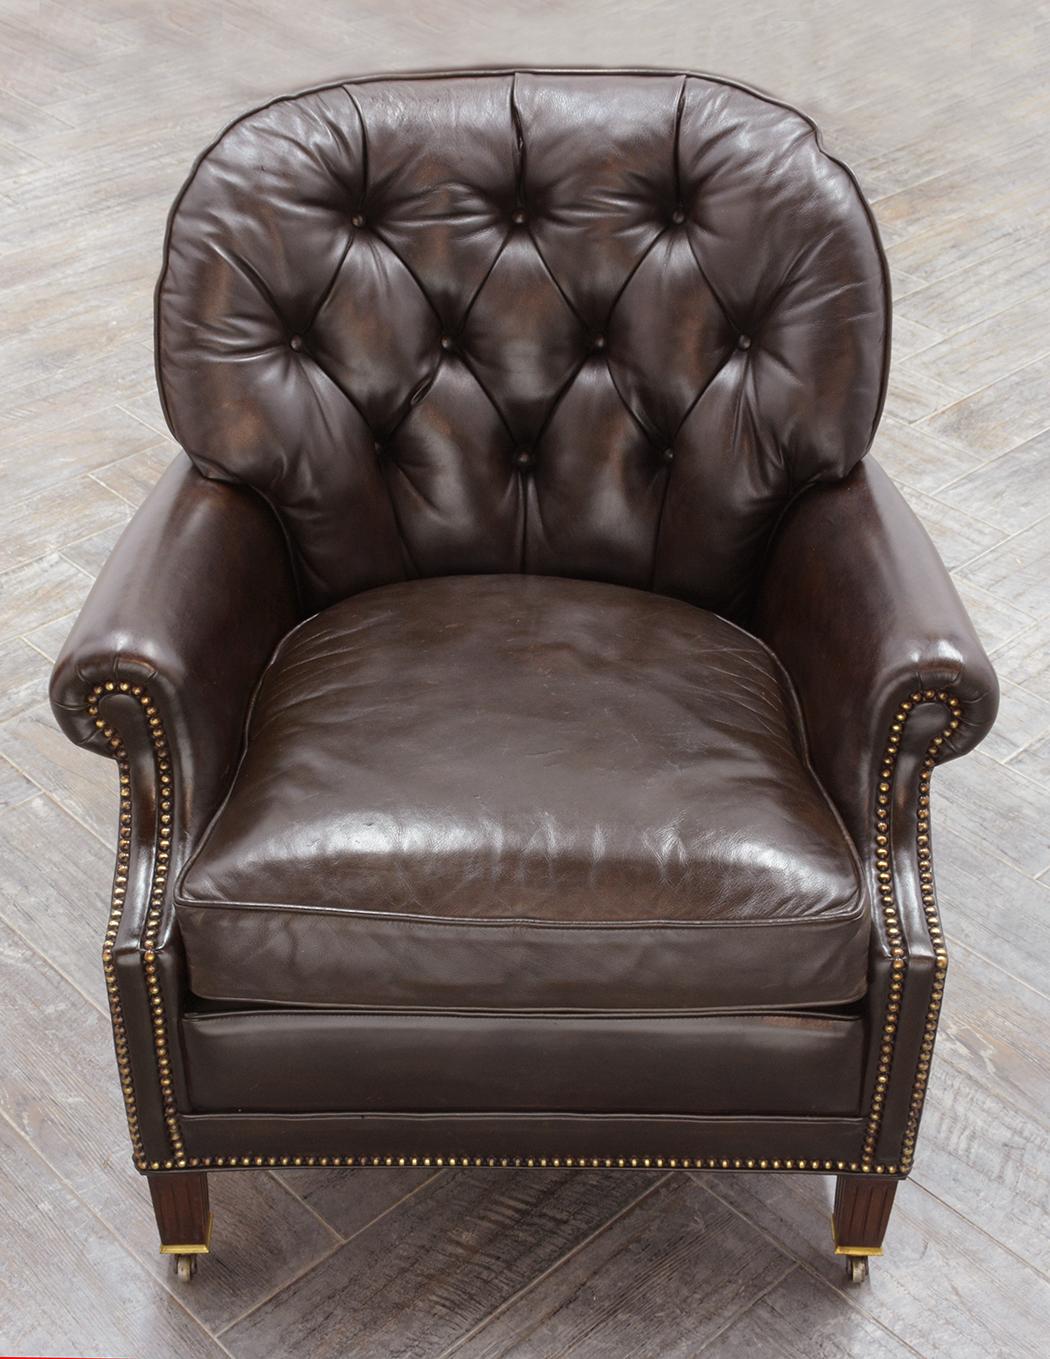 Pair of Tufted Regency Style Leather Club Chairs (Ende des 20. Jahrhunderts)